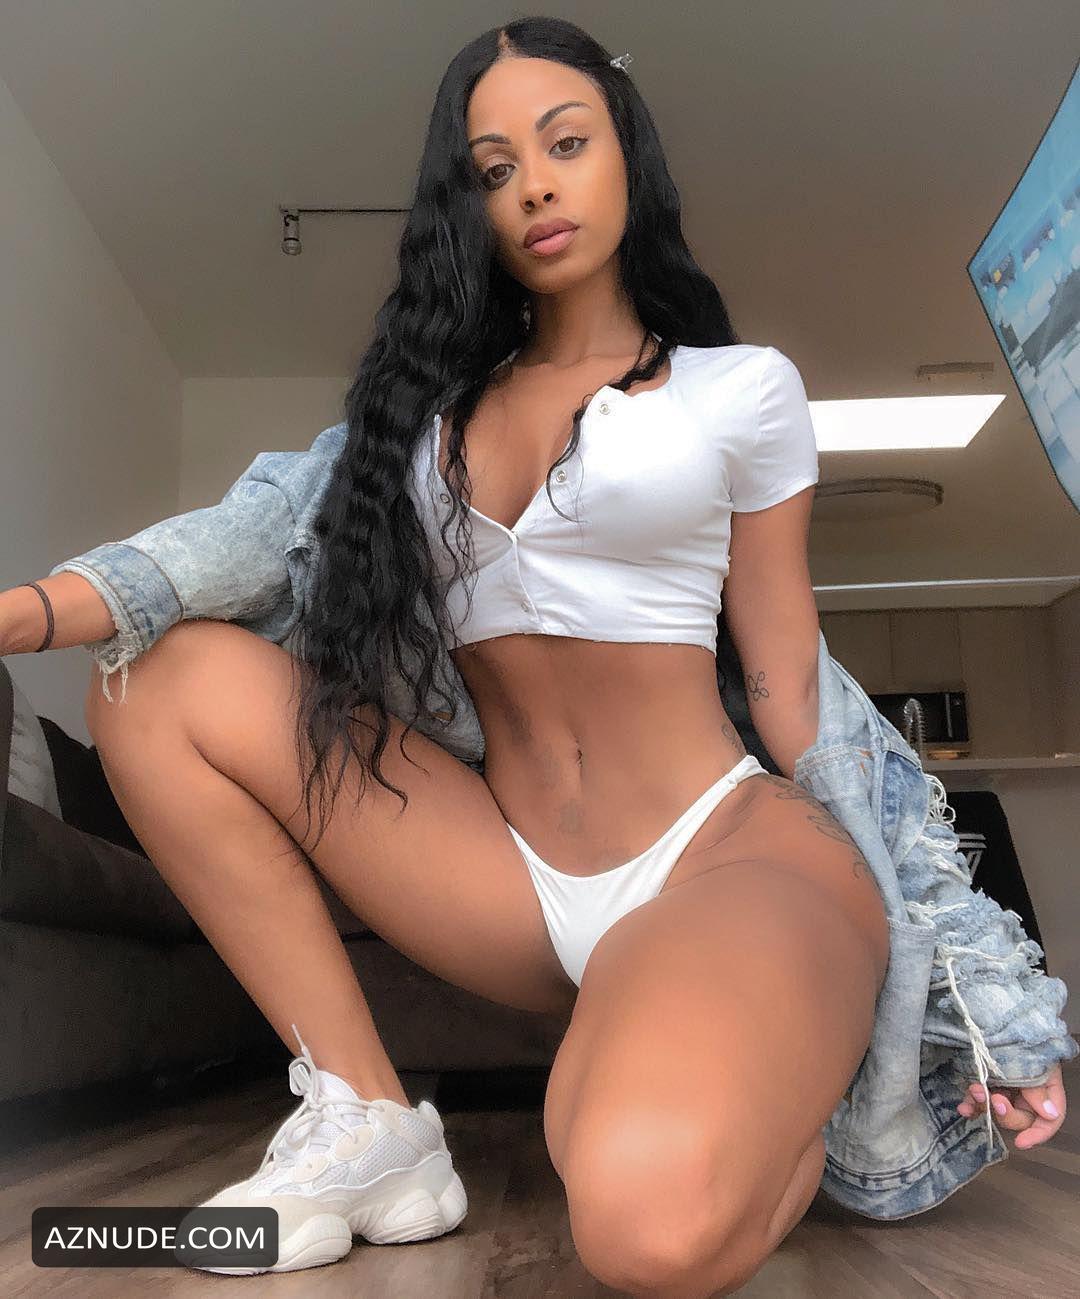 Analicia chaves sexy